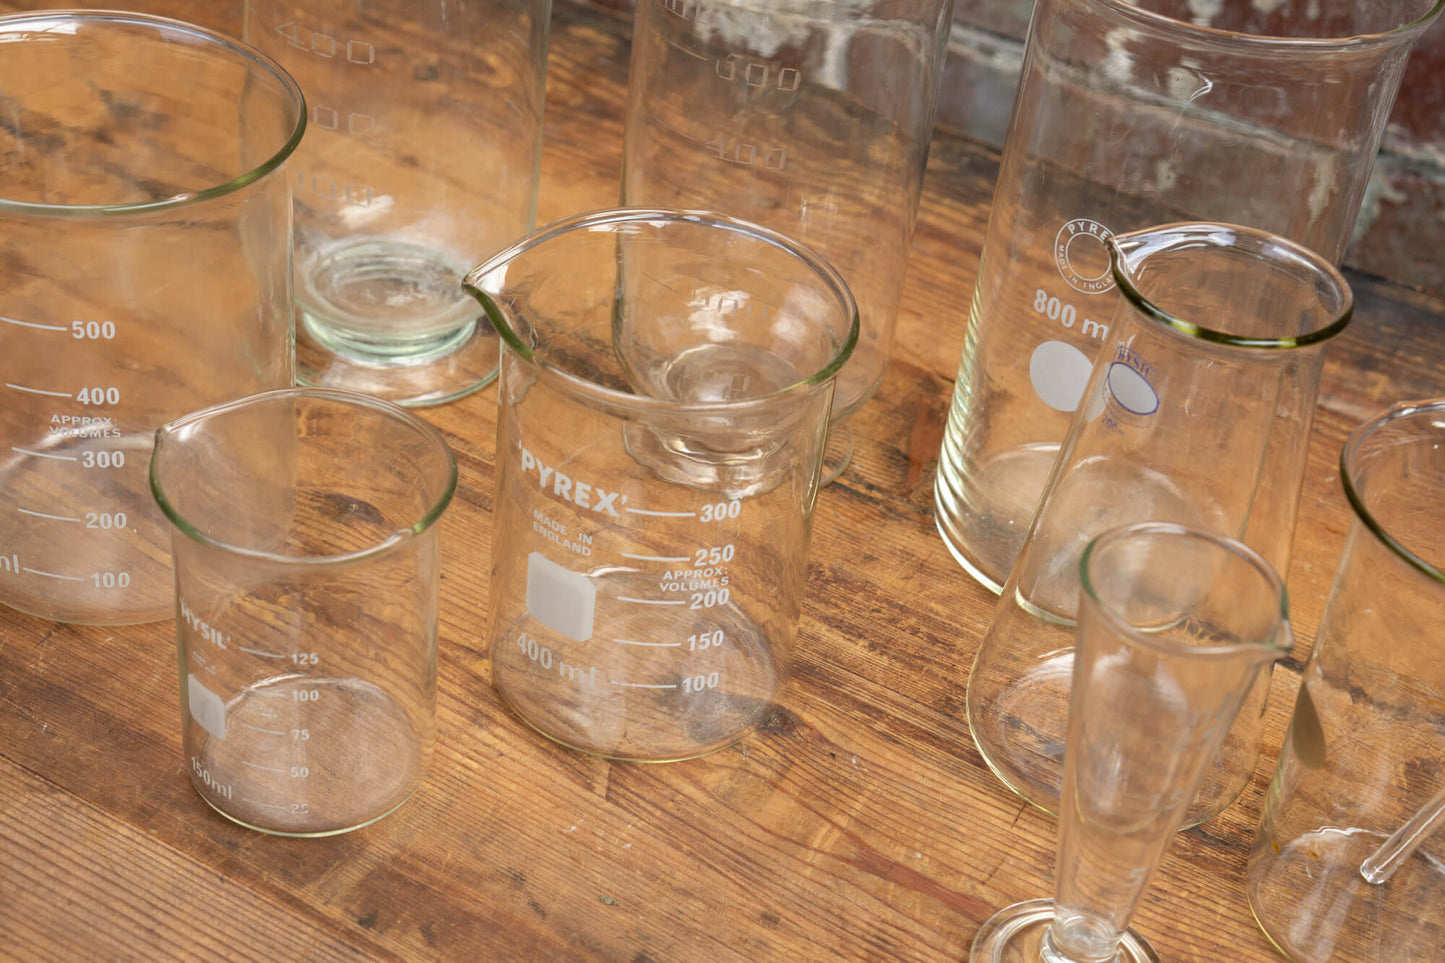 Photo shows a selection of vintage glass laboratory vessels on a table. The background is a red rustic brick wall.